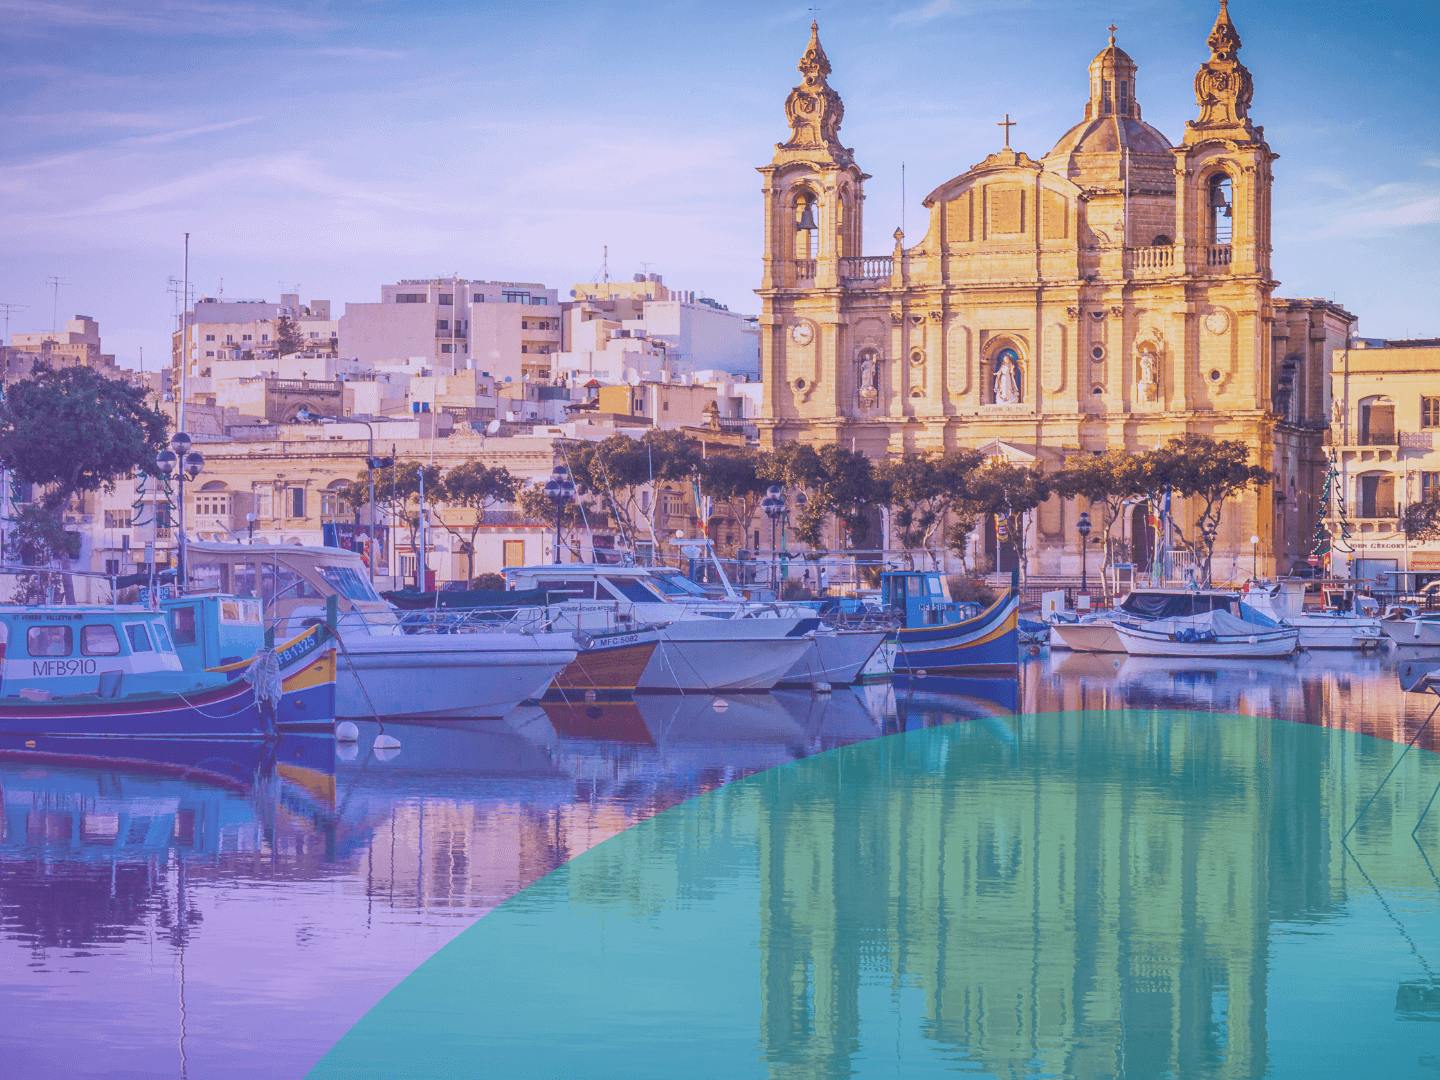 A Maltese-style building with boats nearby. There is a reflection of the view on the sea.